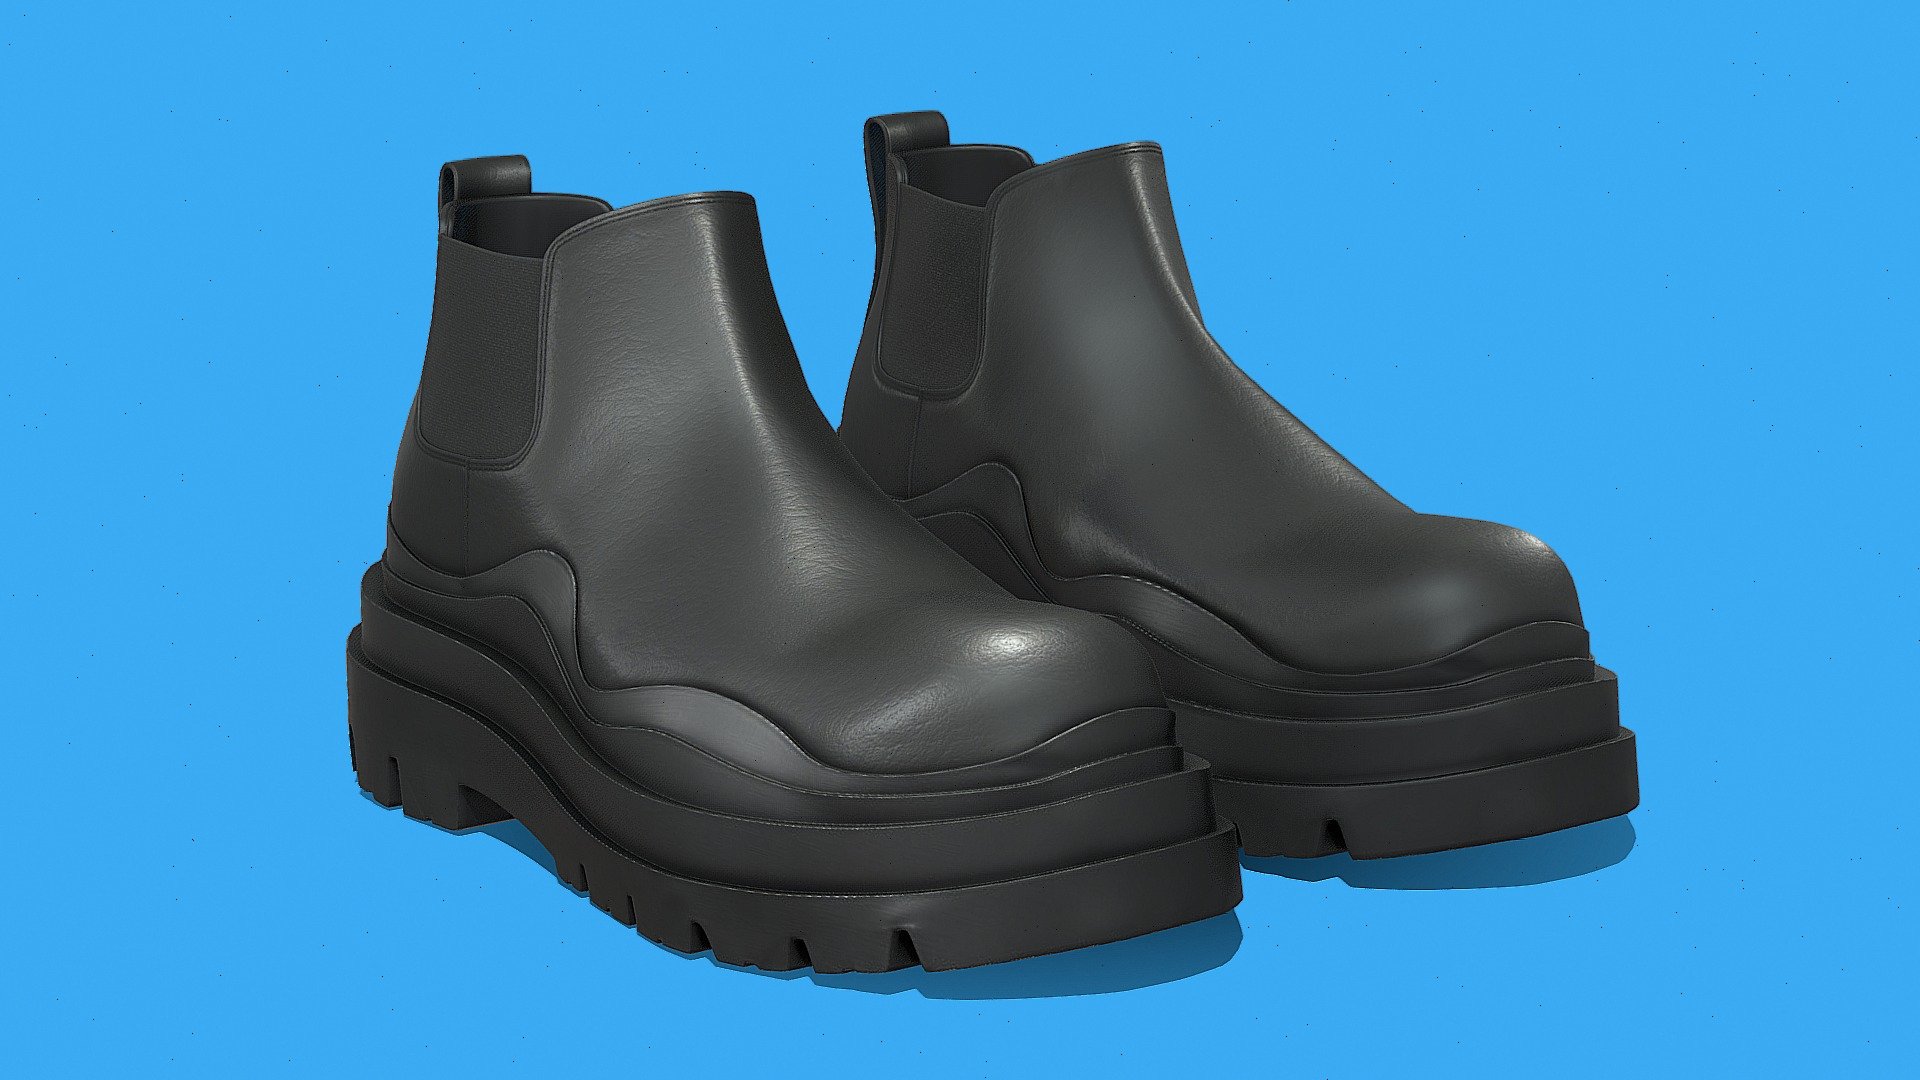 Black Female Leather Boots - Black Female Leather Boots - 3D model by 𝕽𝖊𝖆𝖑 𝕾𝖑𝖎𝖒 𝕾𝖍𝖆𝖉𝖞 (@real_slimshady) 3d model